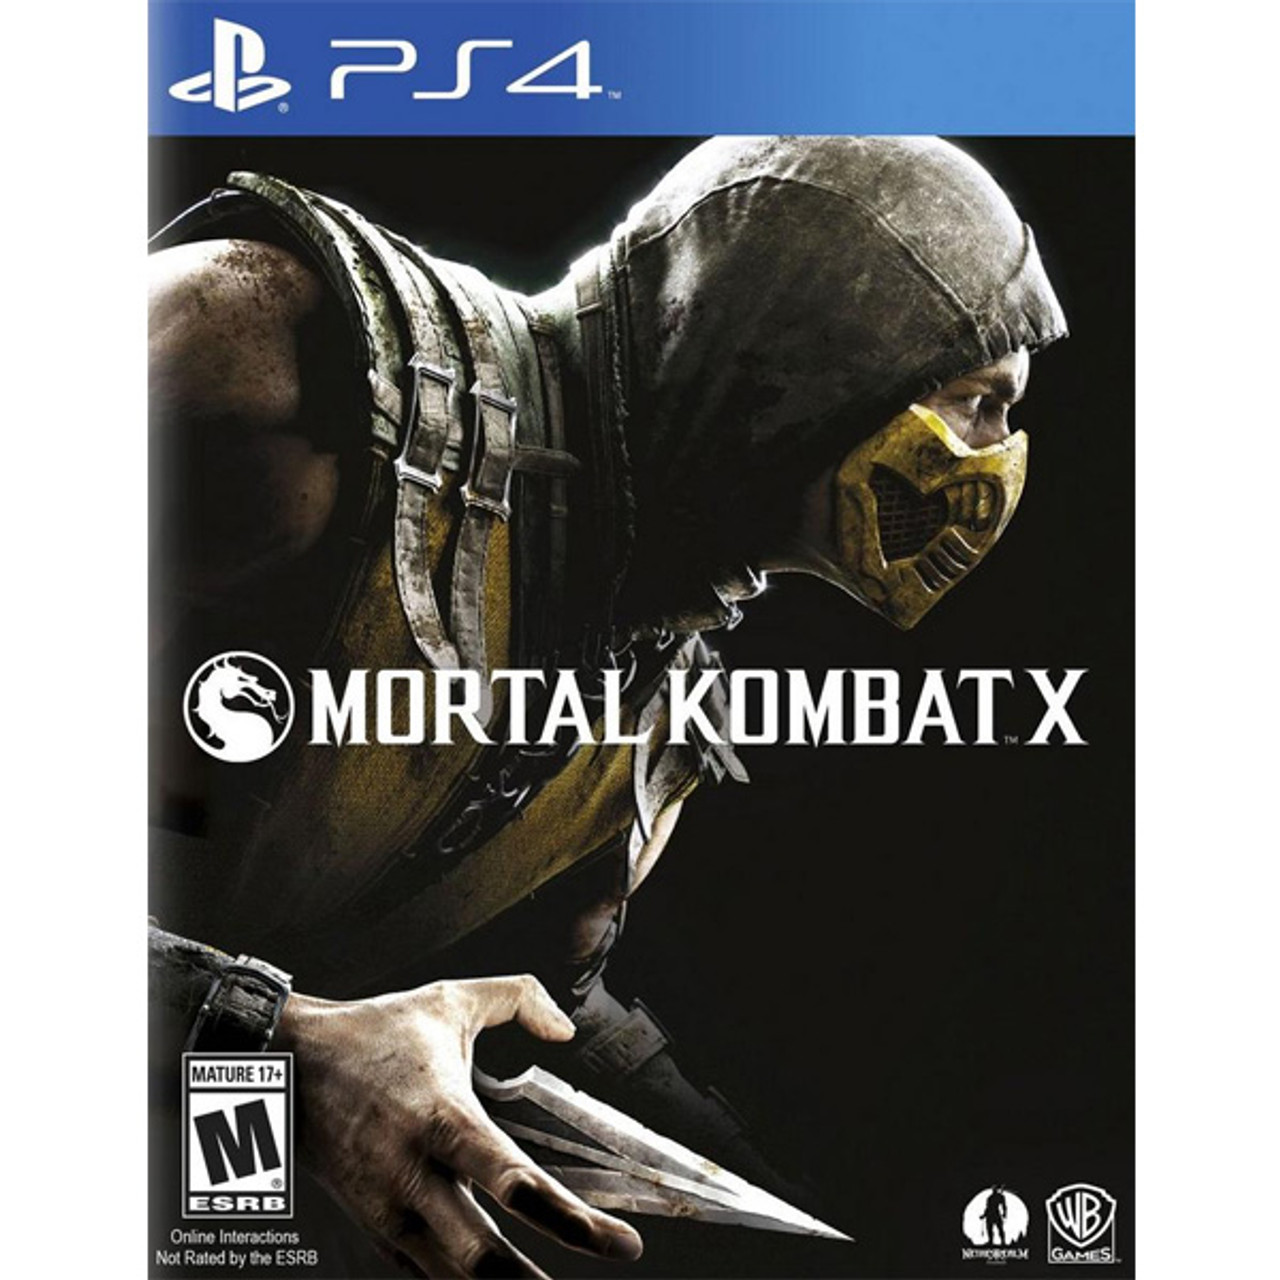 Mortal Kombat (Game only works with NTSC-U/C version, Xbox360 US console)  for Xbox360